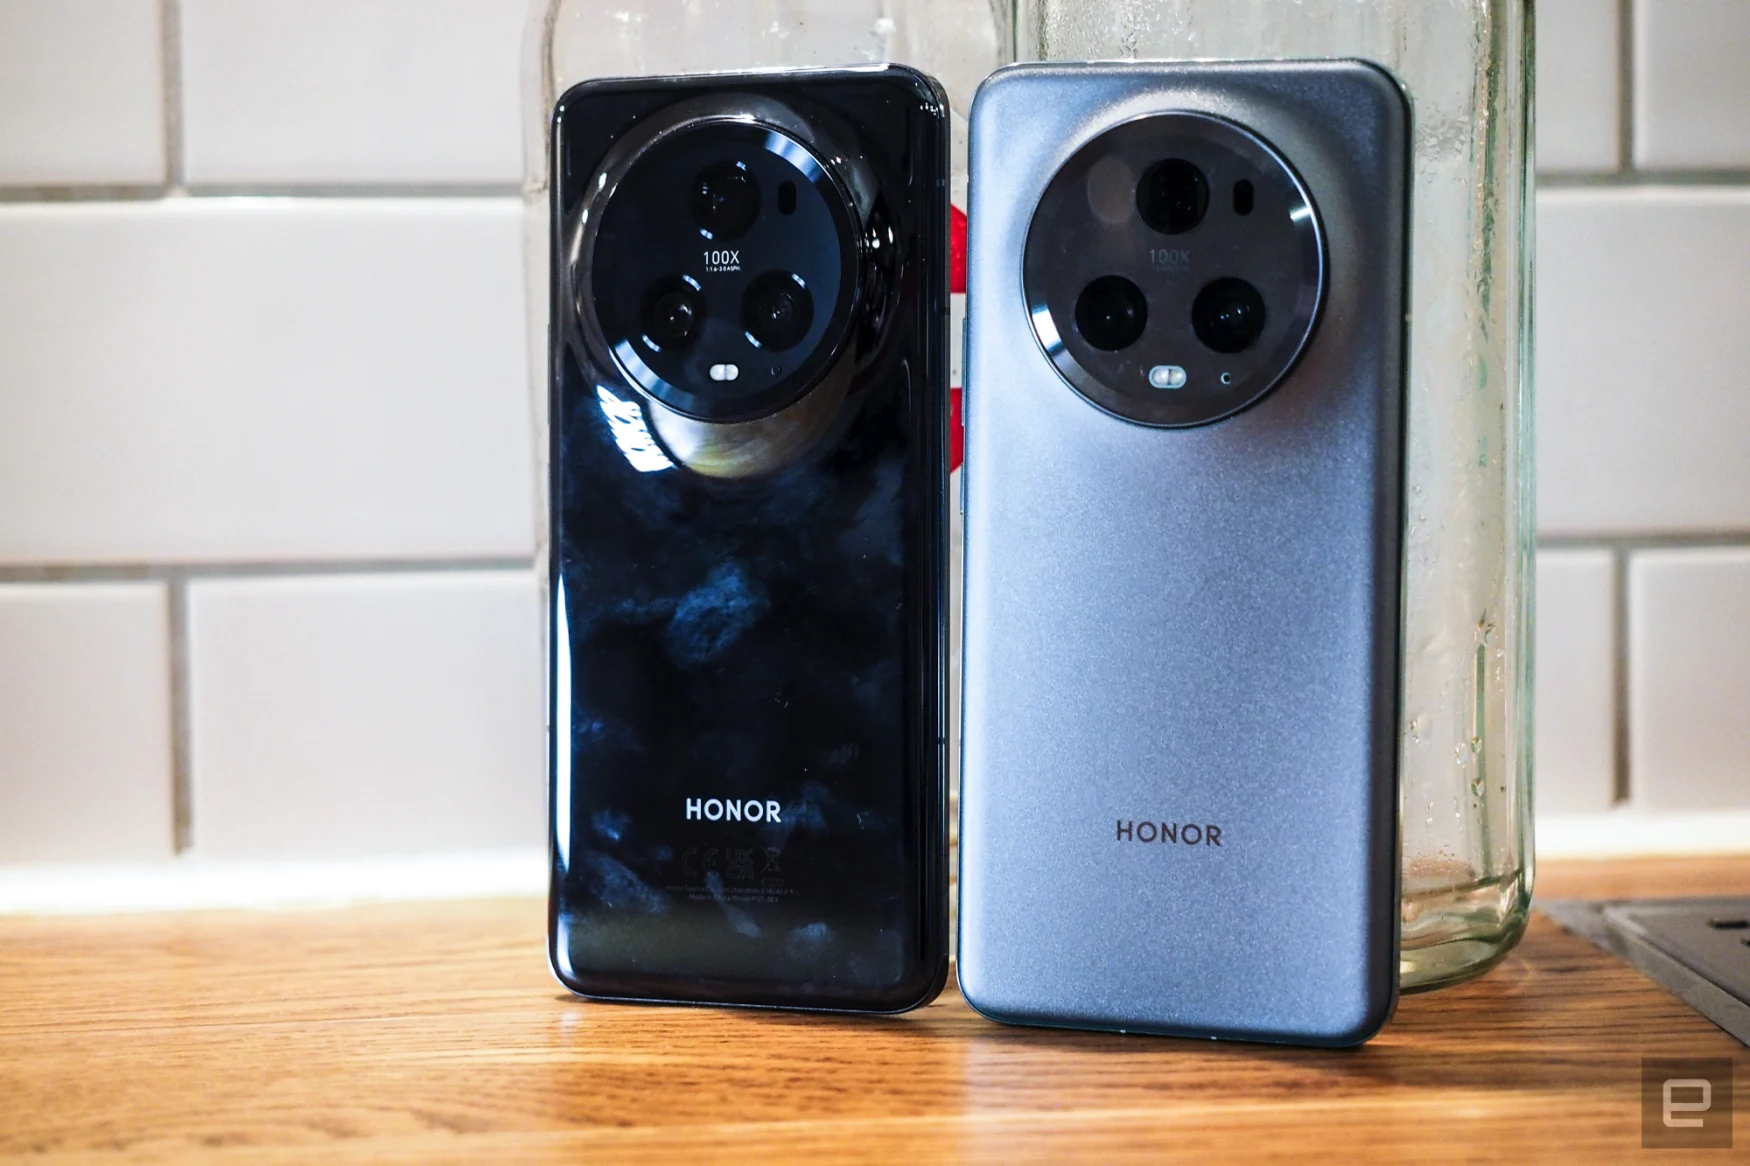 Image of both colorways of Honor's Magic 5 Pro side-by side, including the fingerprint-smeared piano gloss black (which I'd wiped seconds before) and the green version, which looks more petrol in the images.